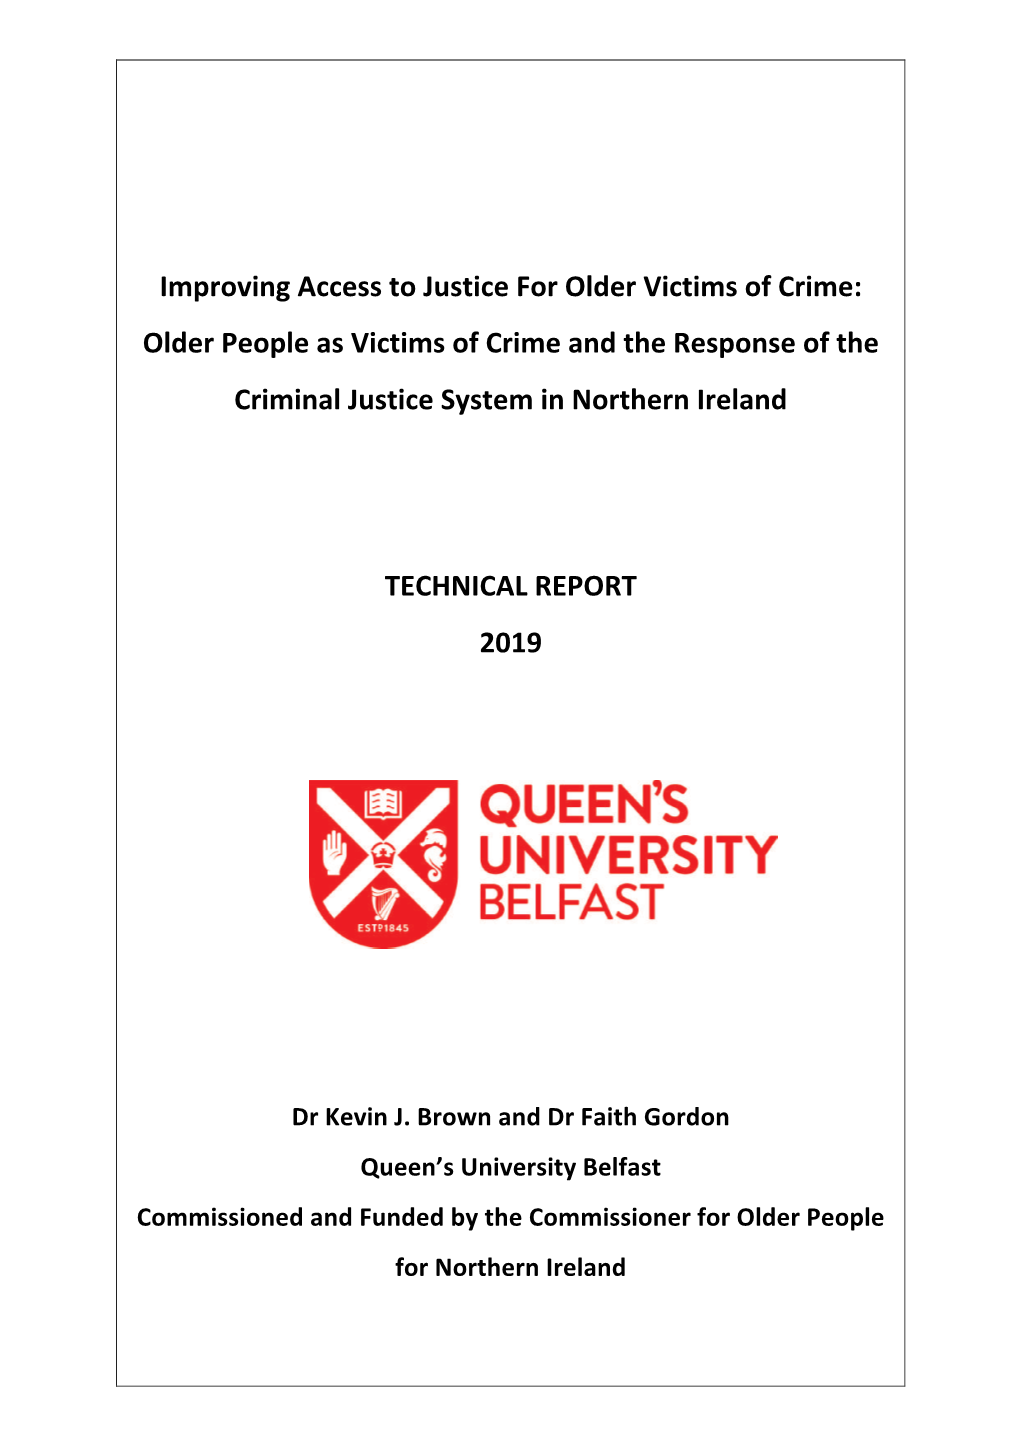 Improving Access to Justice for Older Victims of Crime: Older People As Victims of Crime and the Response of the Criminal Justice System in Northern Ireland